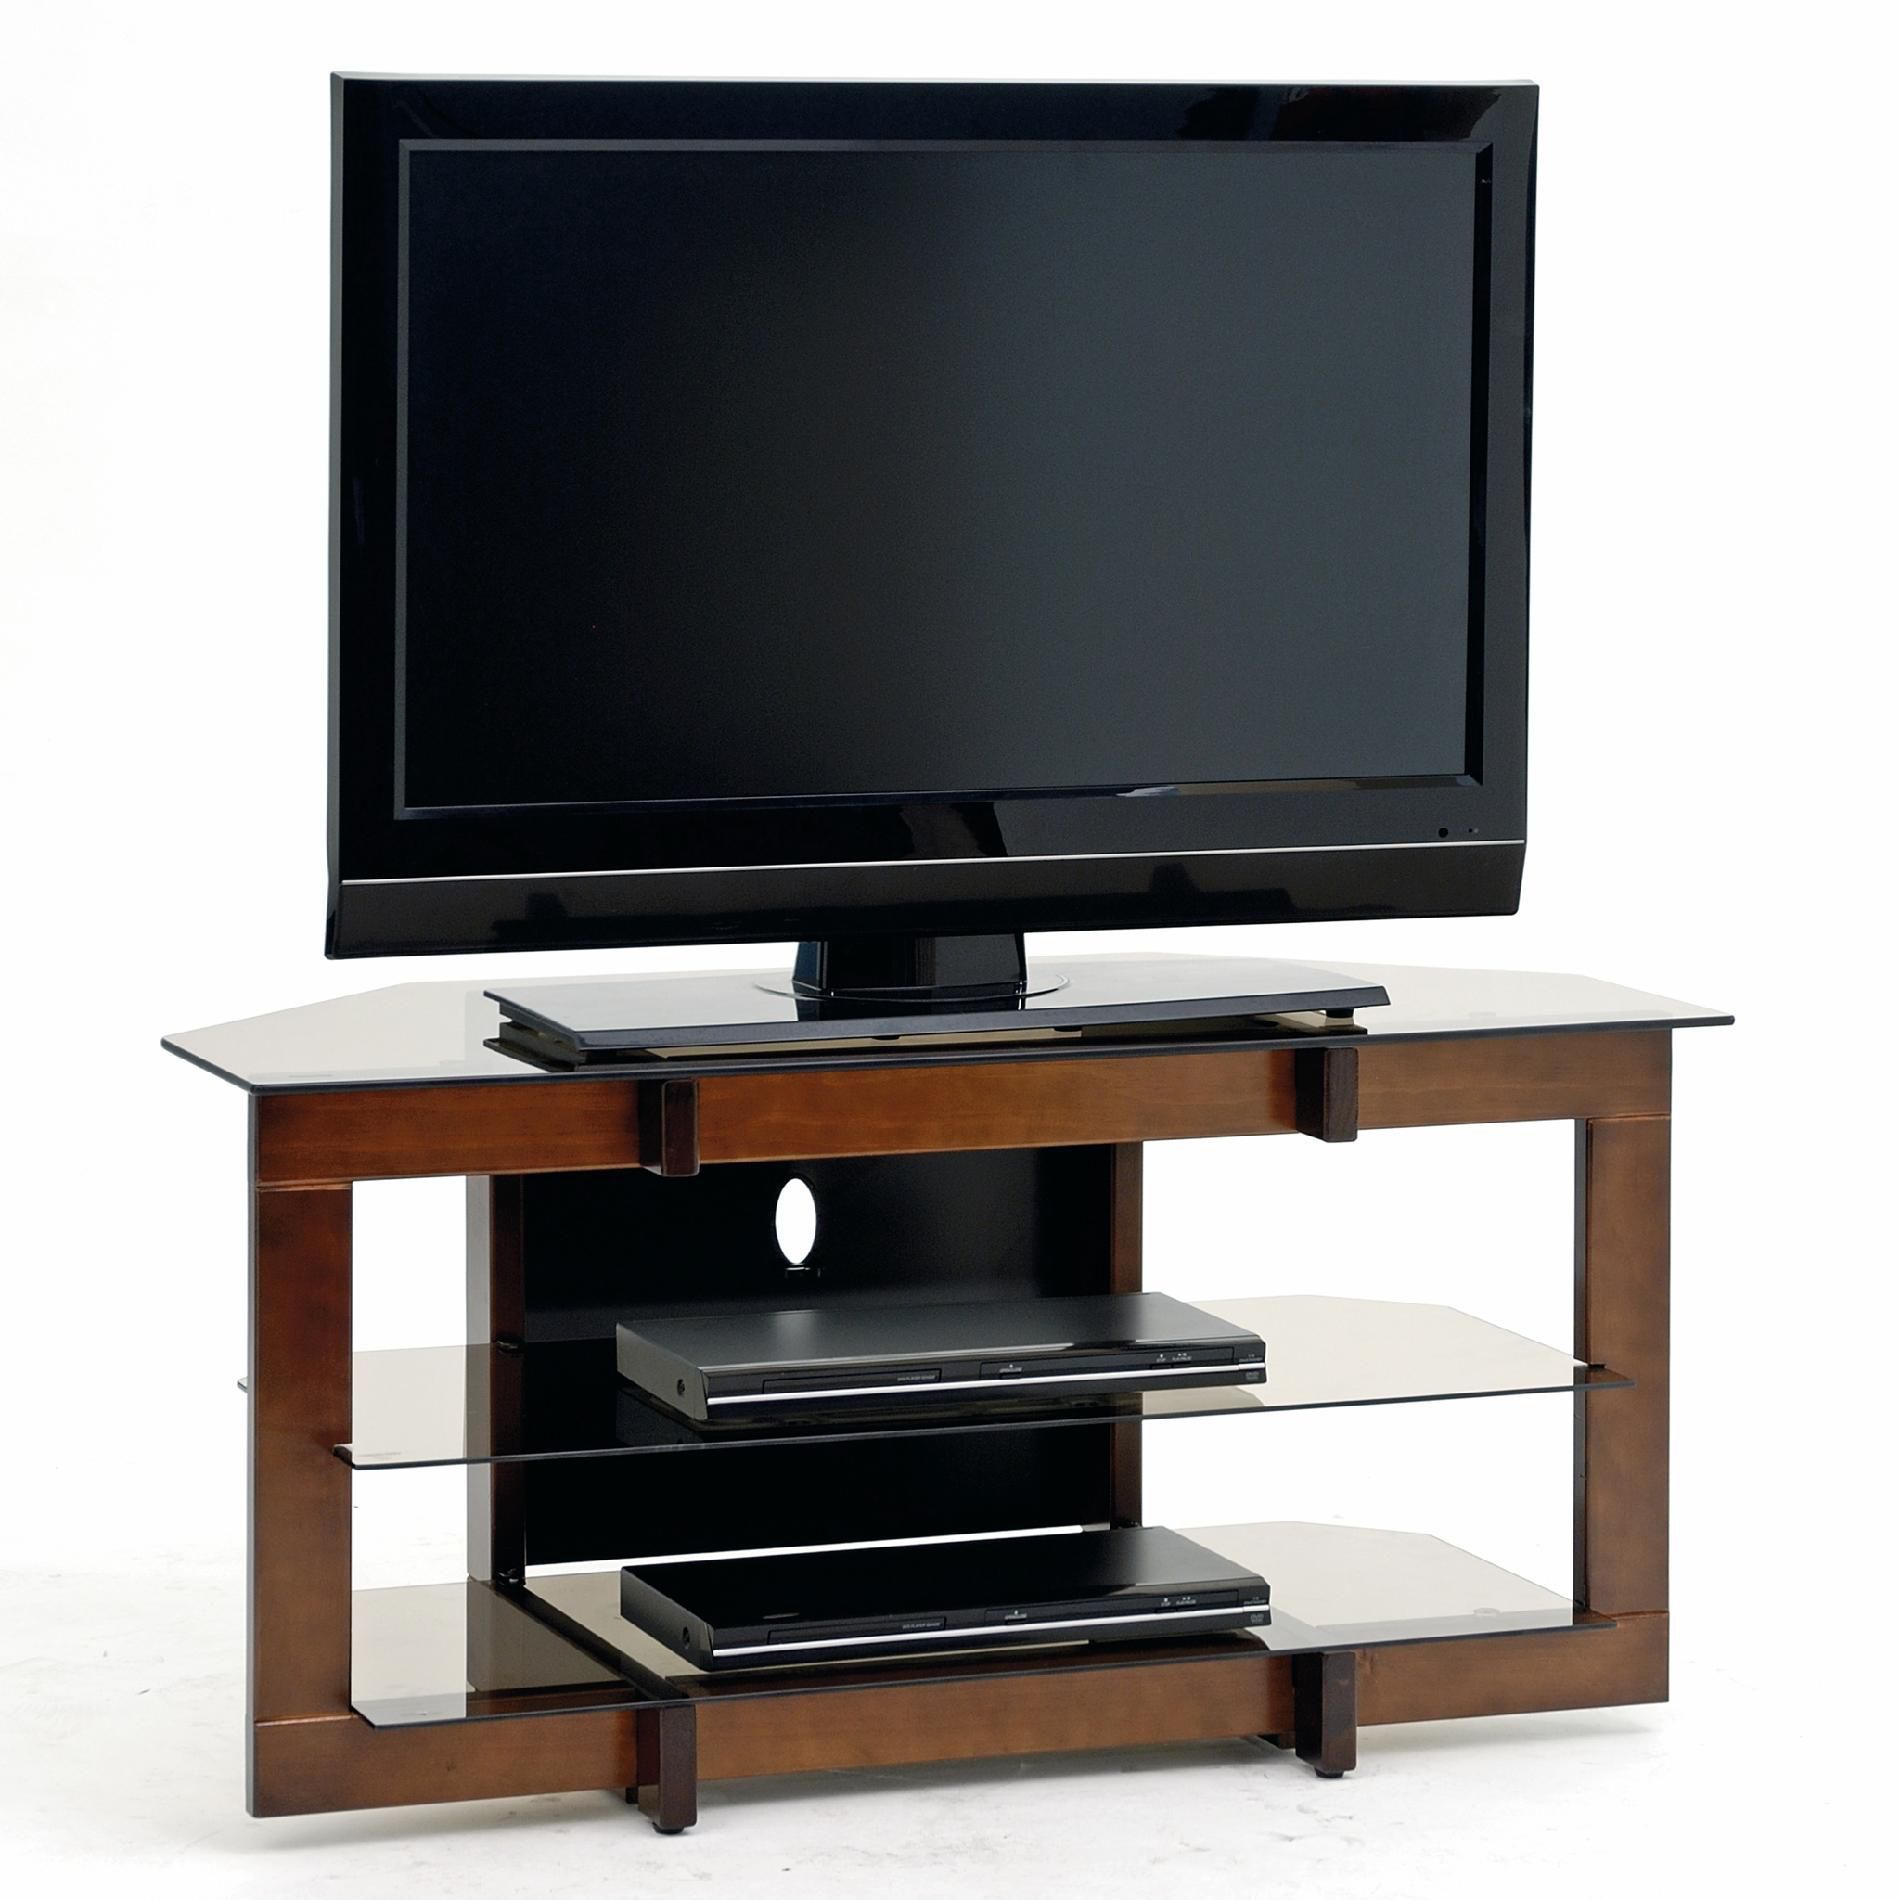 Awesome Best Oak And Glass Tv Stand In 2020 | Tv Ecke, Tv Inside Contemporary Black Tv Stands Corner Glass Shelf (Photo 1 of 15)